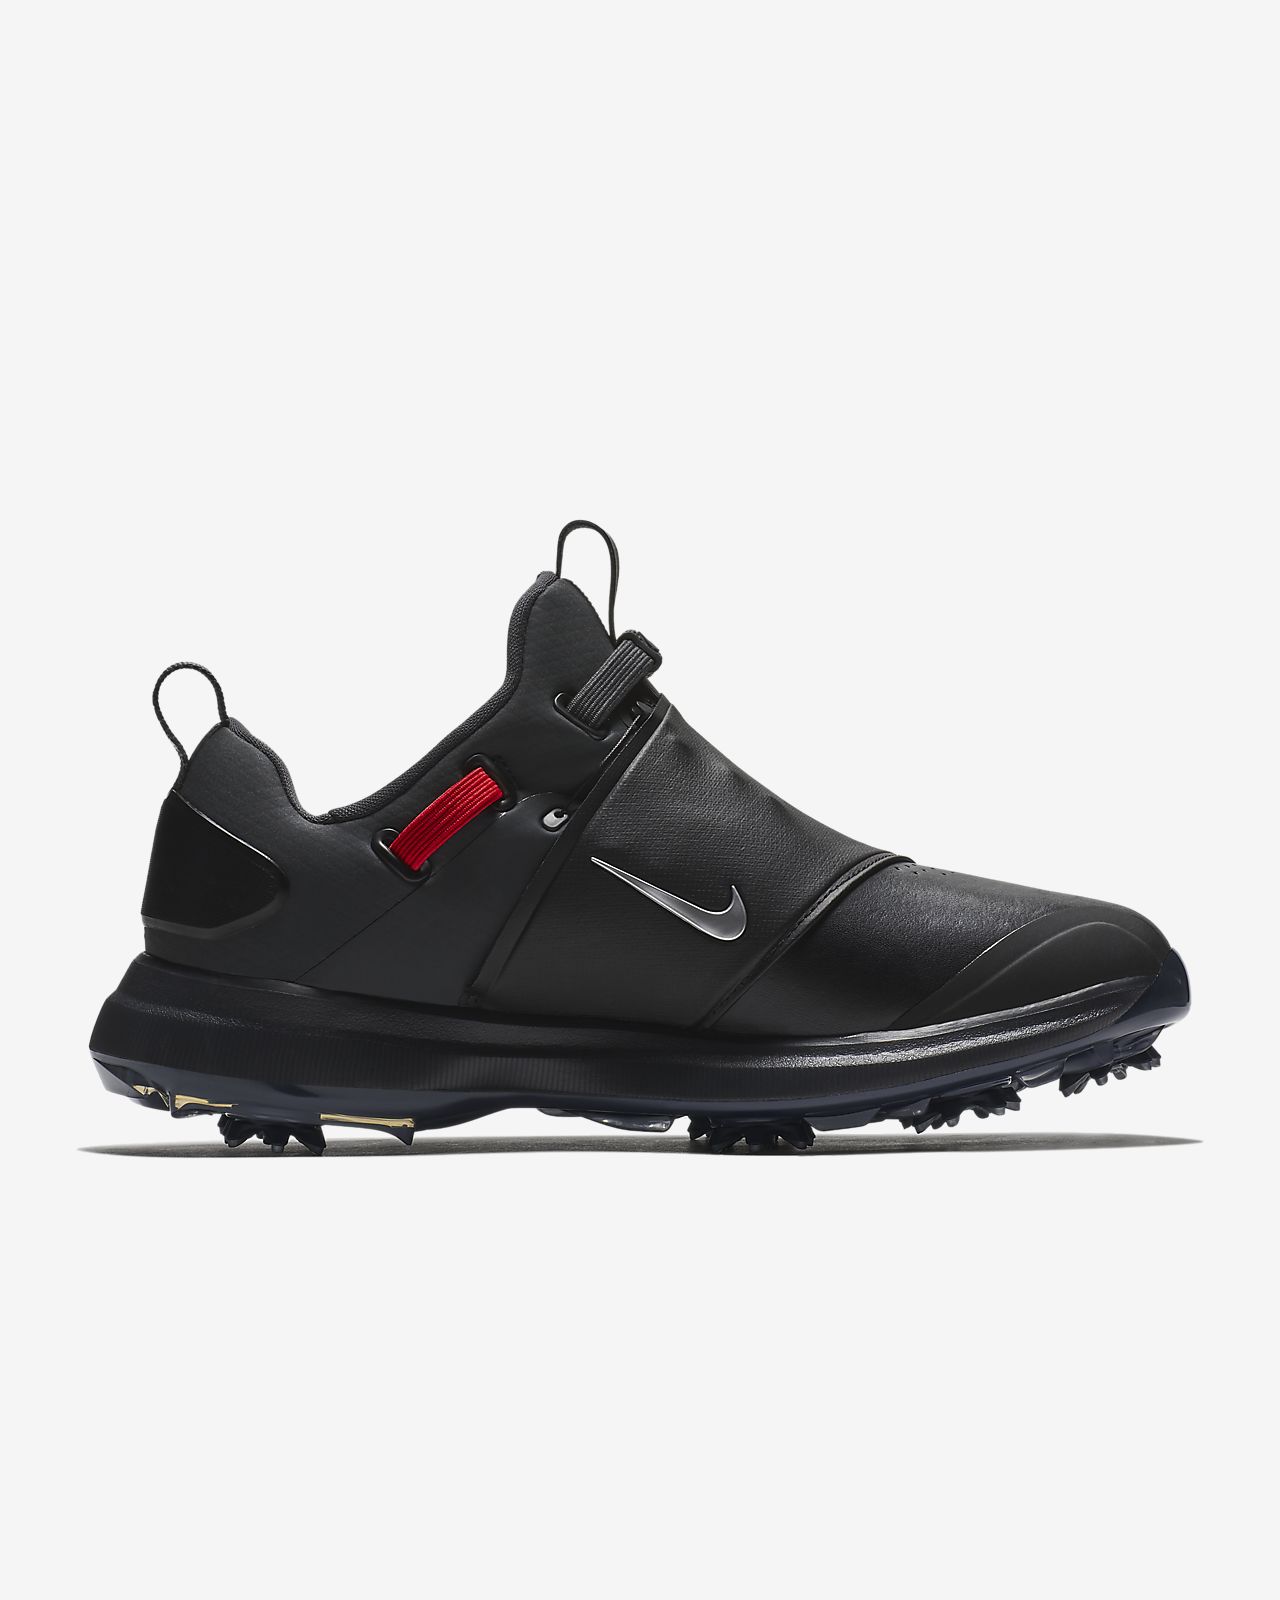 nike golf shoes no laces off 73% - www 